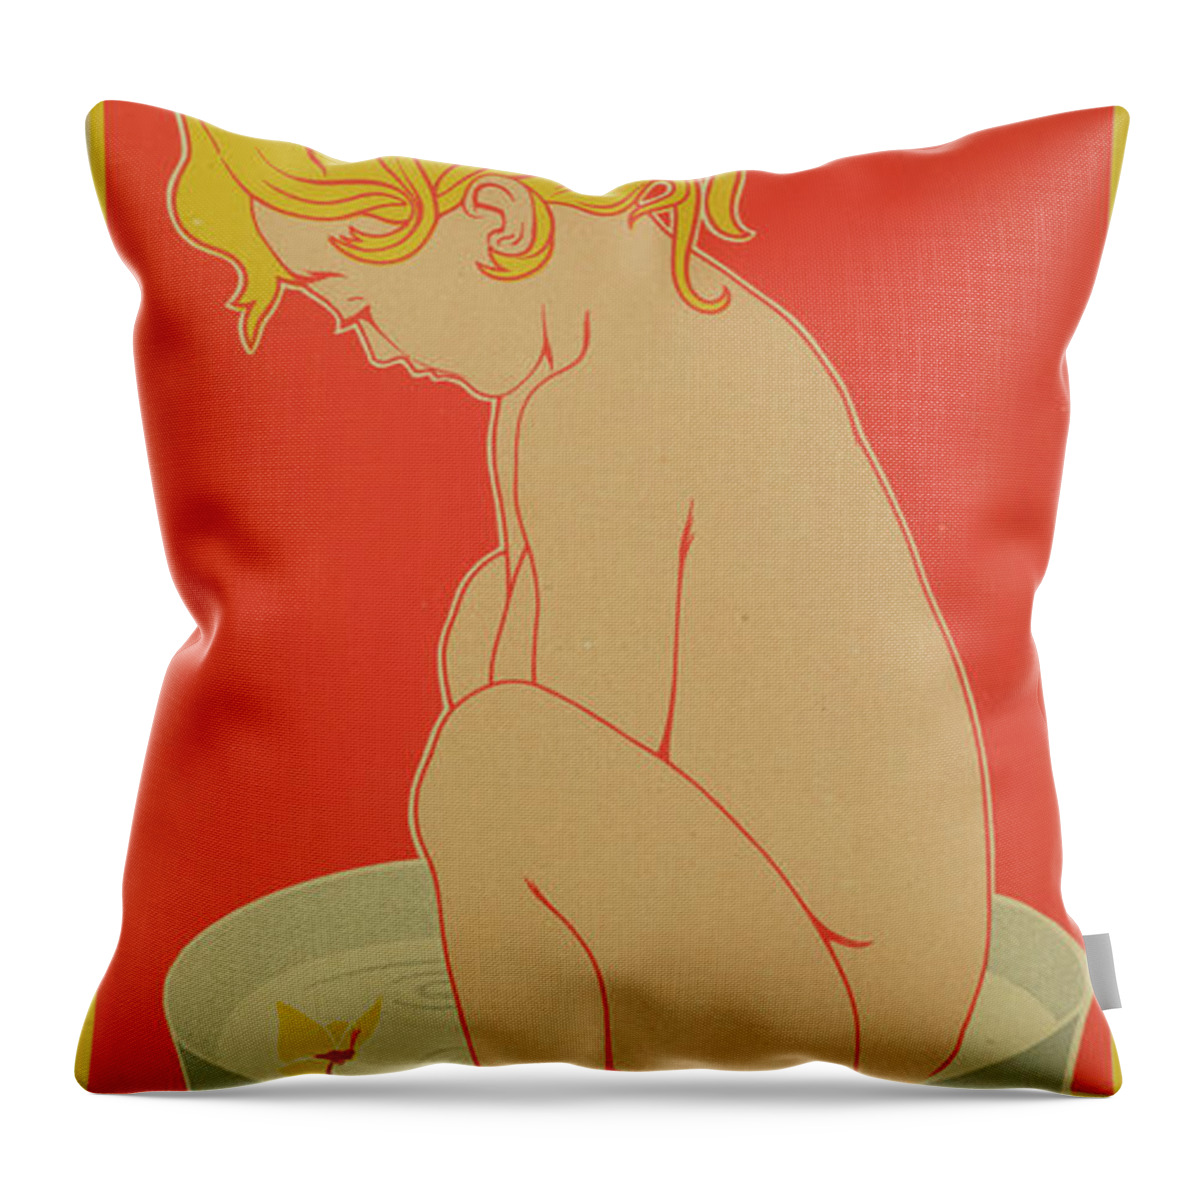 Red Throw Pillow featuring the drawing Reproduction of a poster advertising Starlight Soap by Henri Meunier